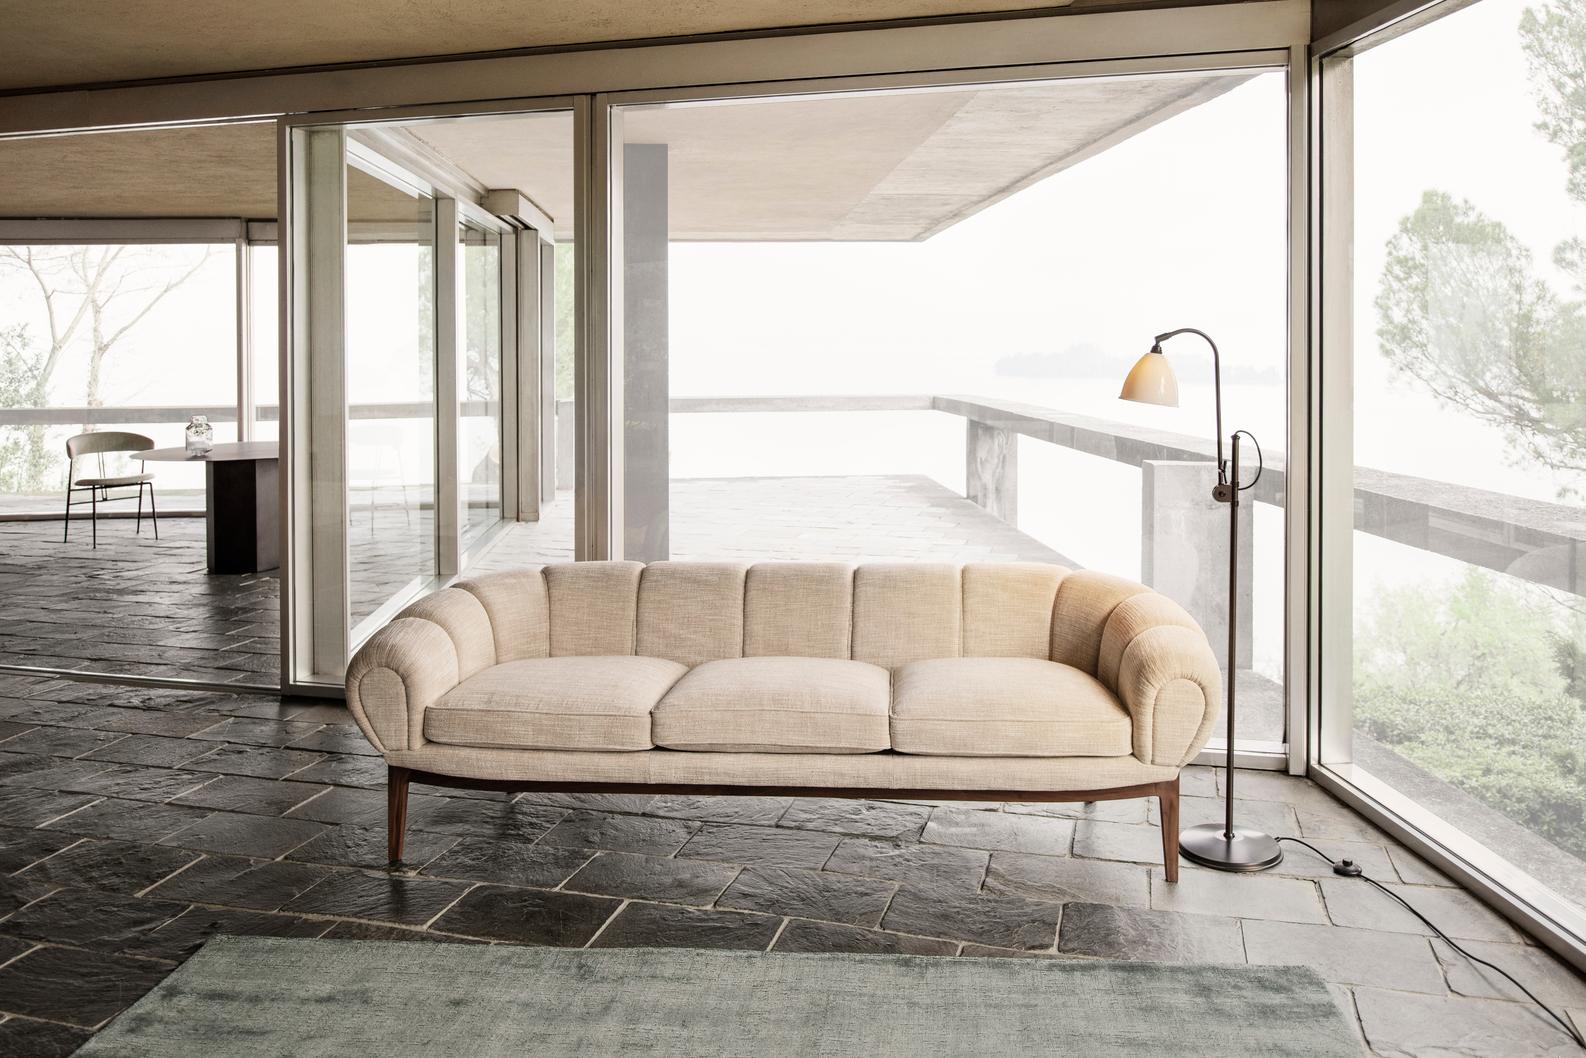 Playful, voluptuous and sublimely crafted, the newly reimagined Croissant Sofa makes a powerful statement in any interior setting and an heirloom to treasure for generations. Unmistakably the work of celebrated architect and designer Ilum Wikkelsø,